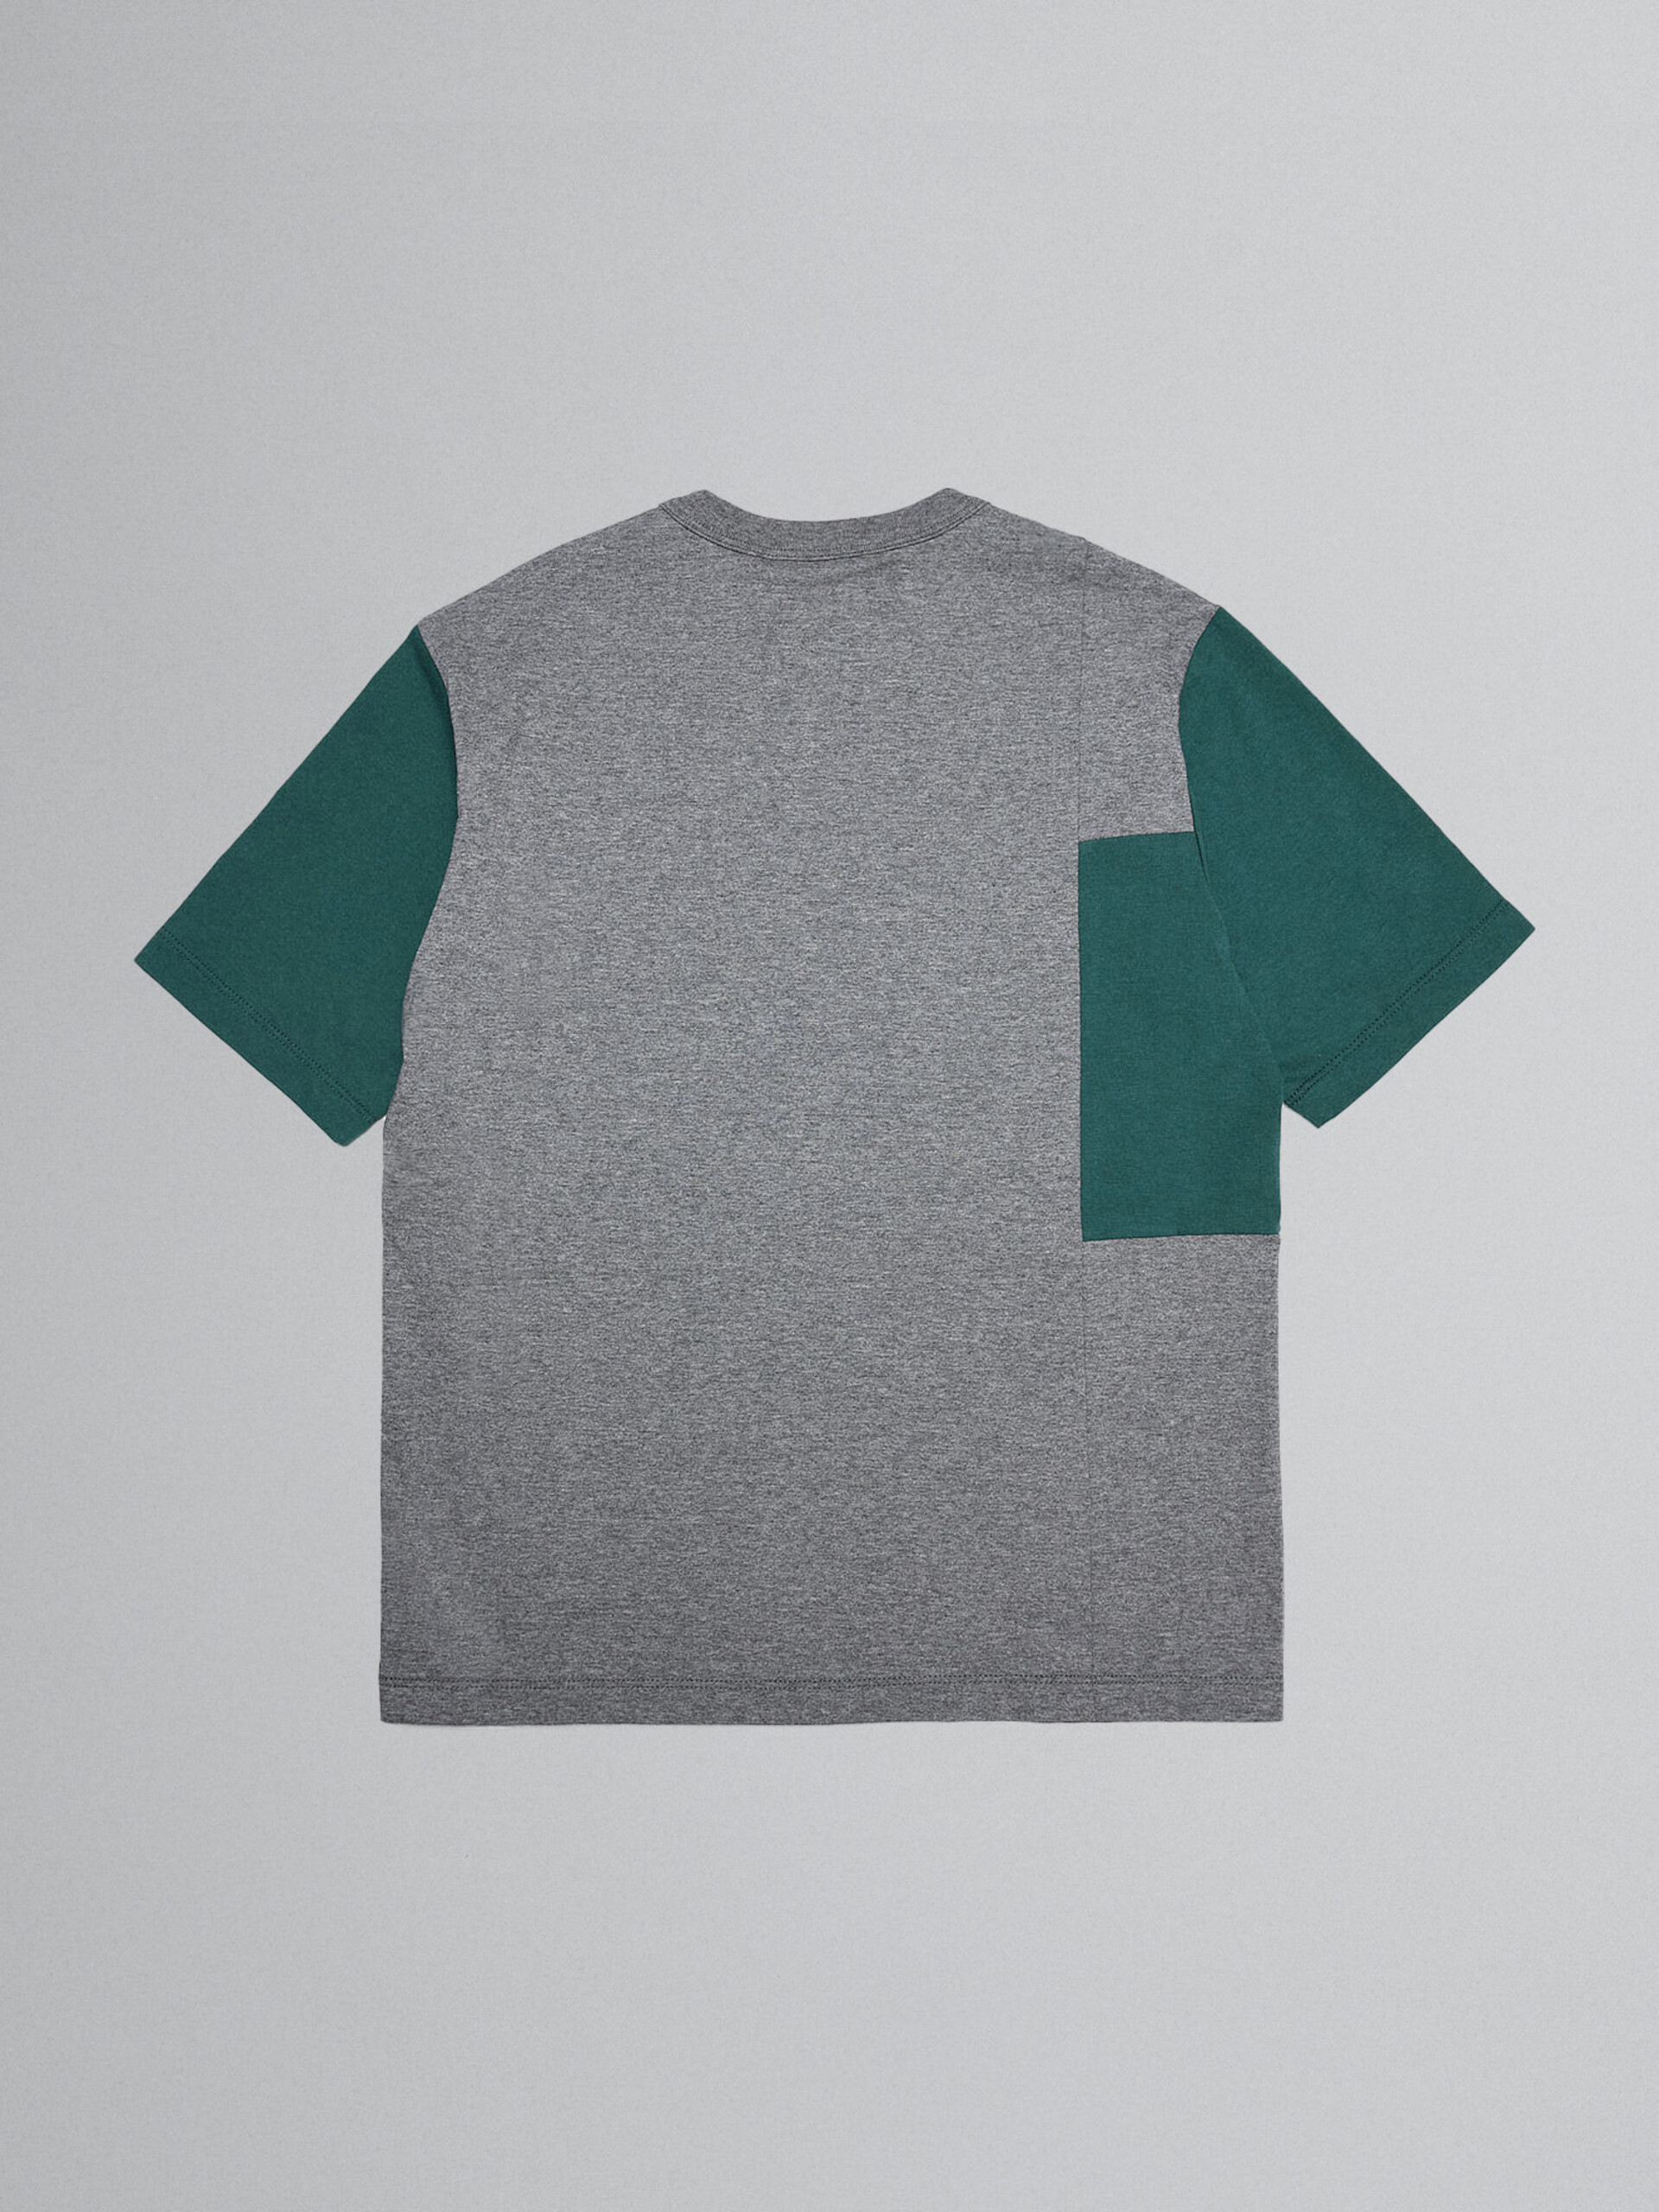 Grey melange college T-shirt with contrast panels - T-shirts - Image 2